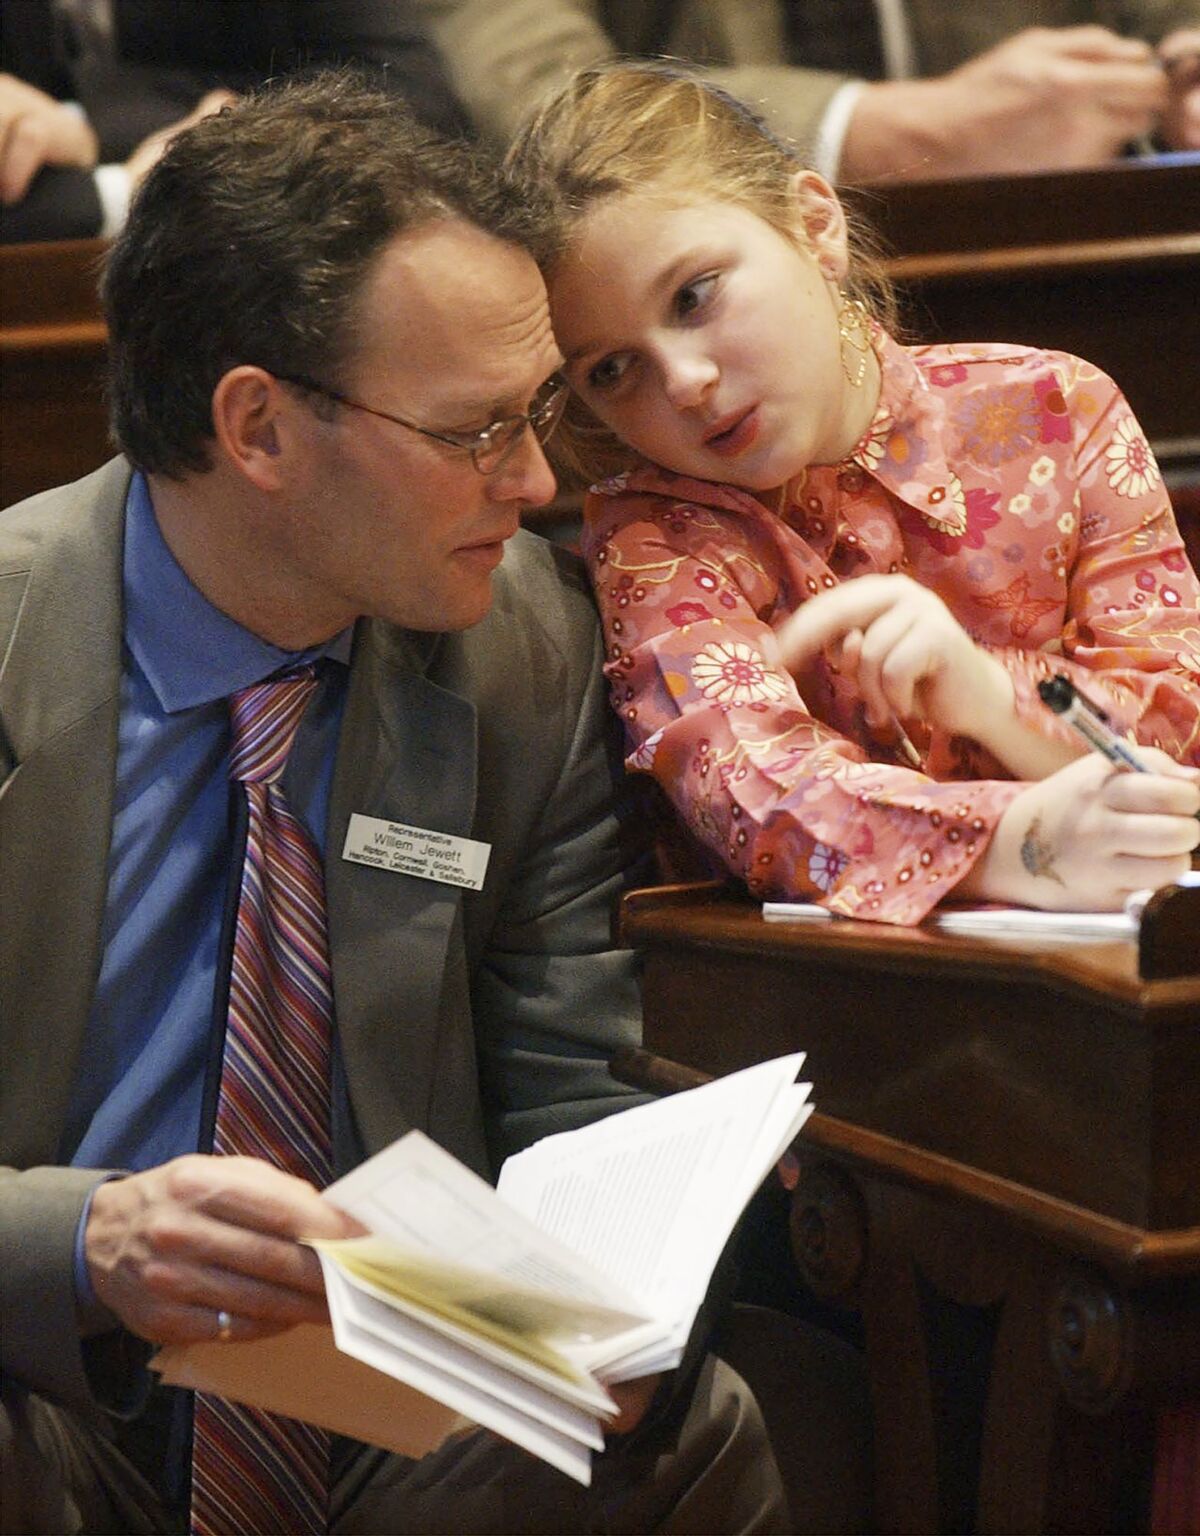 FILE — Vermont Rep. Willem Jewett, D-Ripton, left, chats with his daughter, Anneke, during the first day of the legislature, in Montpelier, Vt., Jan. 5, 2004. The former Vermont lawmaker and House majority leader died on Wednesday, Jan. 12, 2022. Jewett, who had cancer, helped pass a Vermont's aid-in-dying law that allows terminally ill patients to ask their doctors for a lethal dose of medication. (AP Photo/Toby Talbot, File)